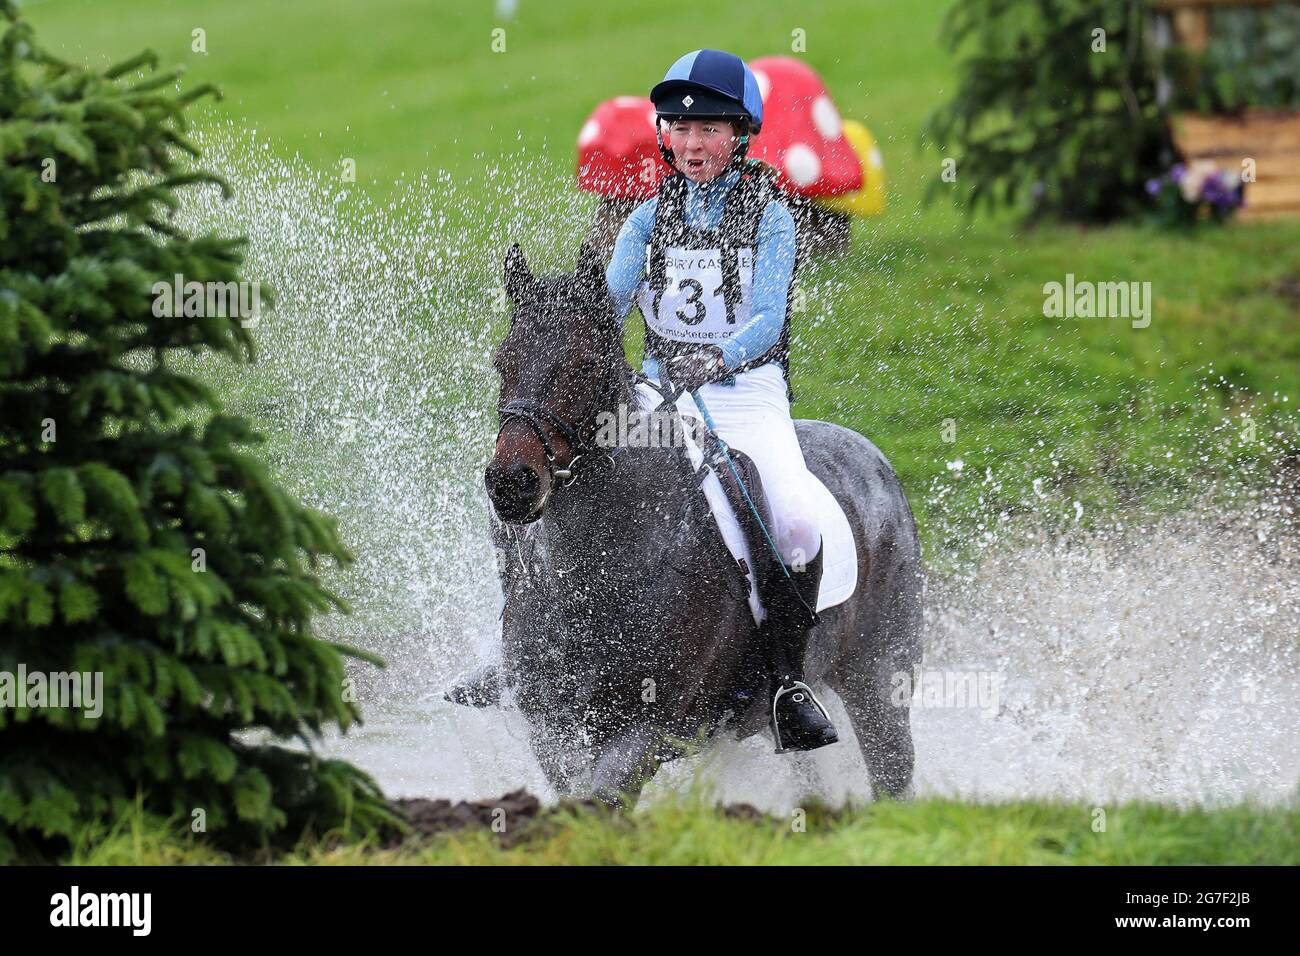 MARLBOROUGH, UK. JULY 10TH. Alexandra Horne riding Burley Morse during PT Section M Cross Country event at the Barbury Castle International Horse Trials, Marlborough, Wiltshire, UK on Saturday 10th July 2021. (Credit: Jon Bromley | MI News) Stock Photo